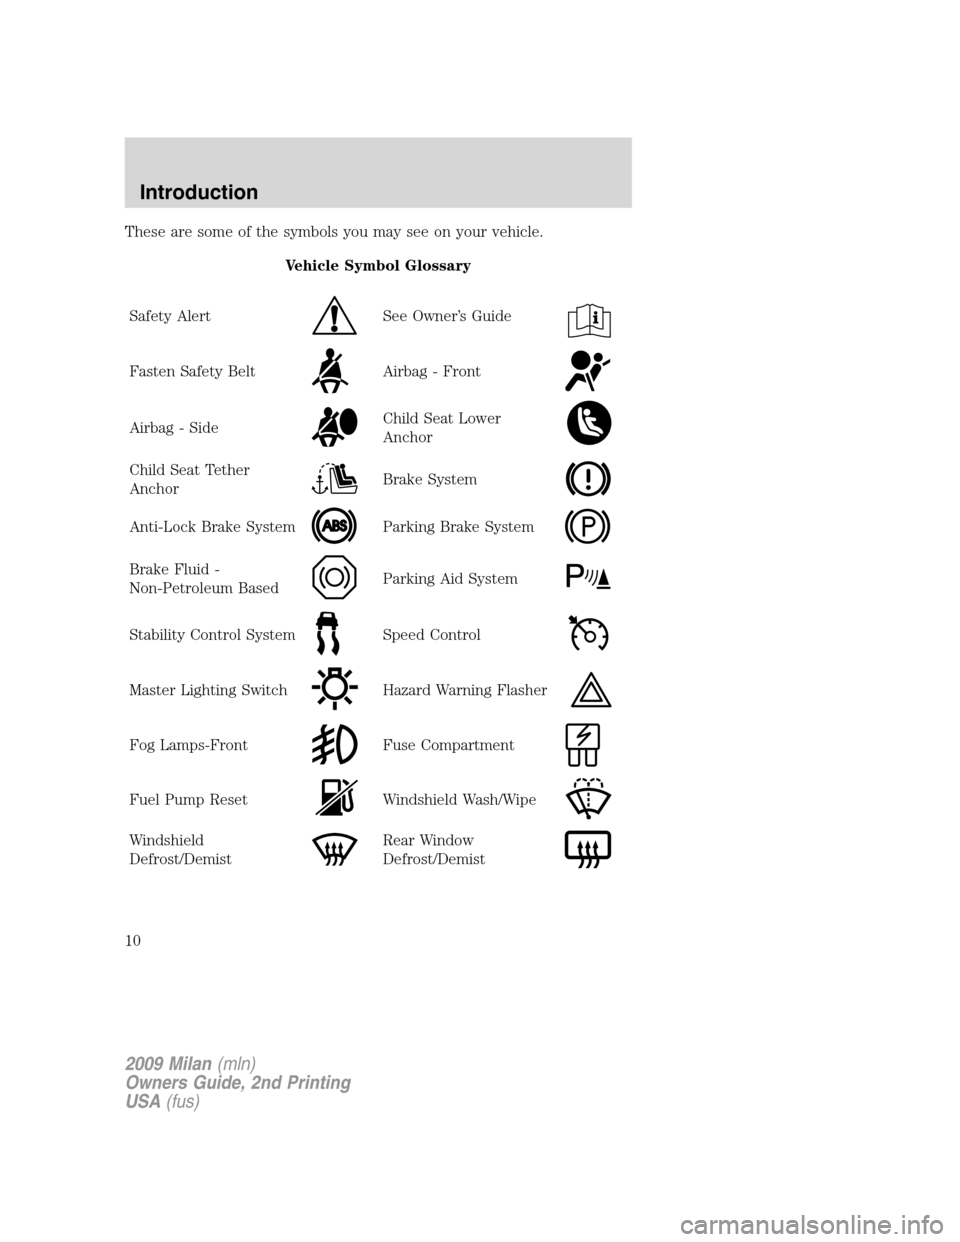 Mercury Milan 2009  Owners Manuals These are some of the symbols you may see on your vehicle.
Vehicle Symbol Glossary
Safety Alert
See Owner’s Guide
Fasten Safety BeltAirbag - Front
Airbag - SideChild Seat Lower
Anchor
Child Seat Tet